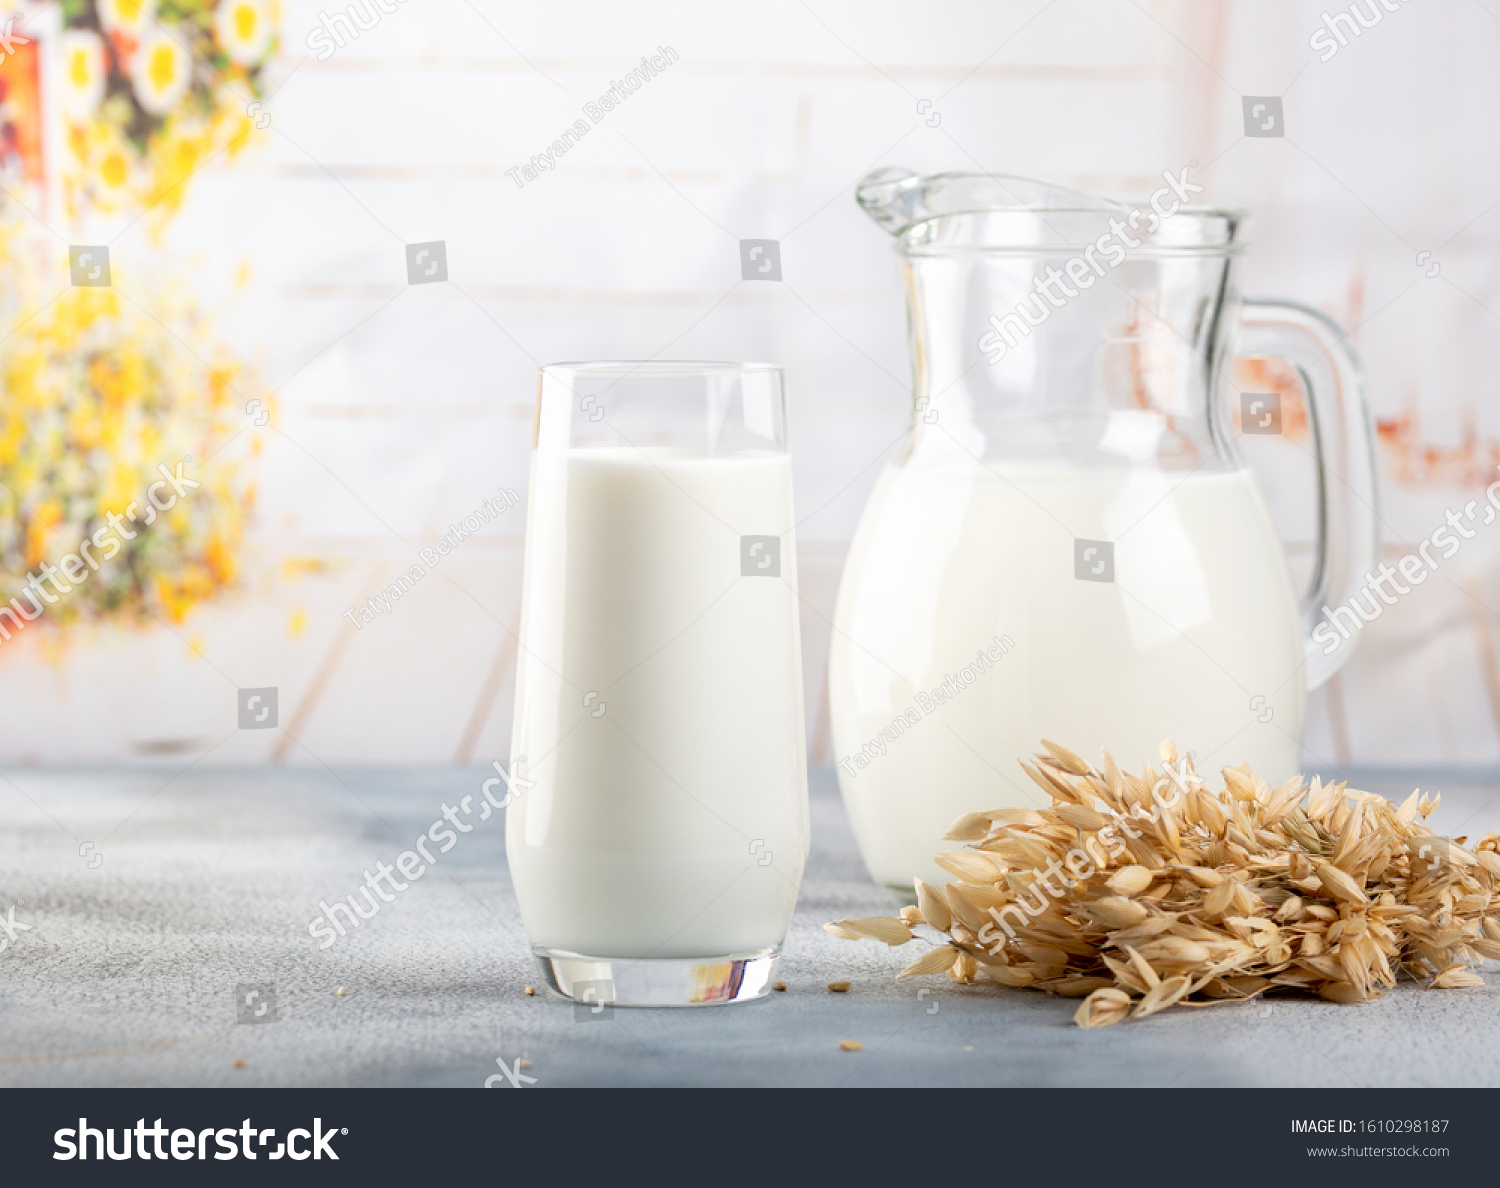 Glass of vegan oat milk and Oat on a table, space for text. Light background #1610298187